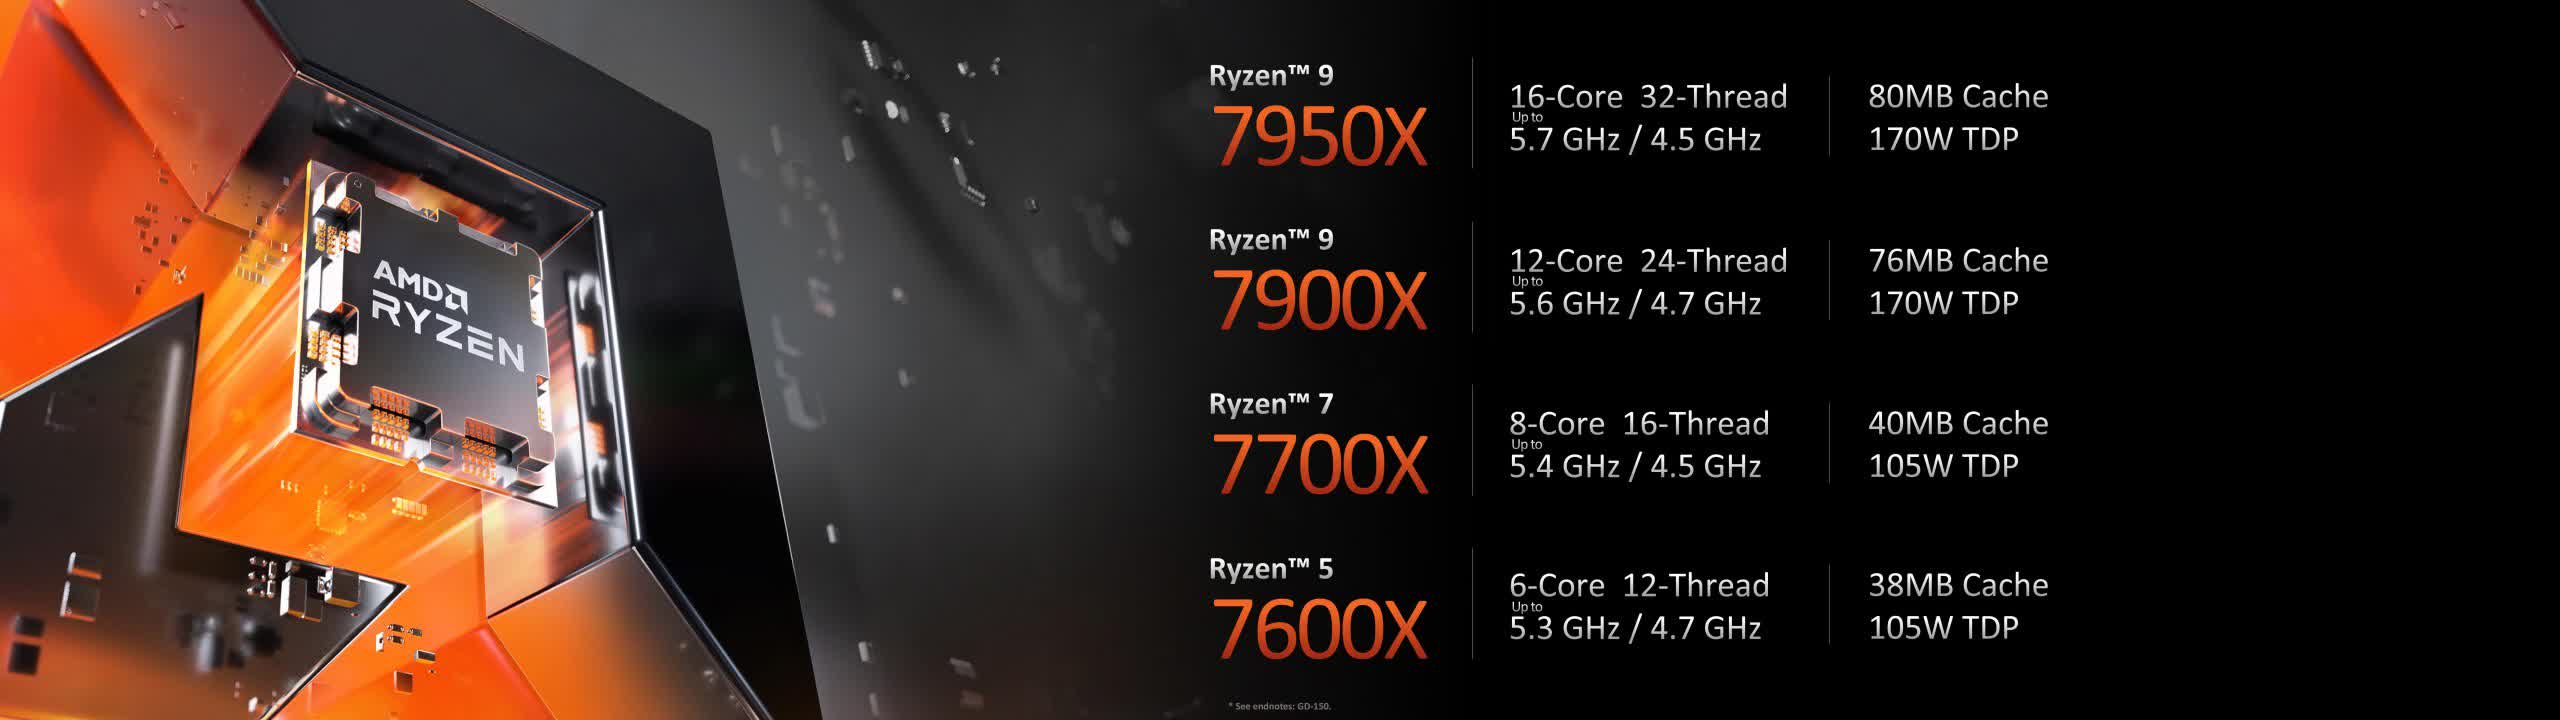 AMD Ryzen 7000 launch: First impressions and performance claims | TechSpot